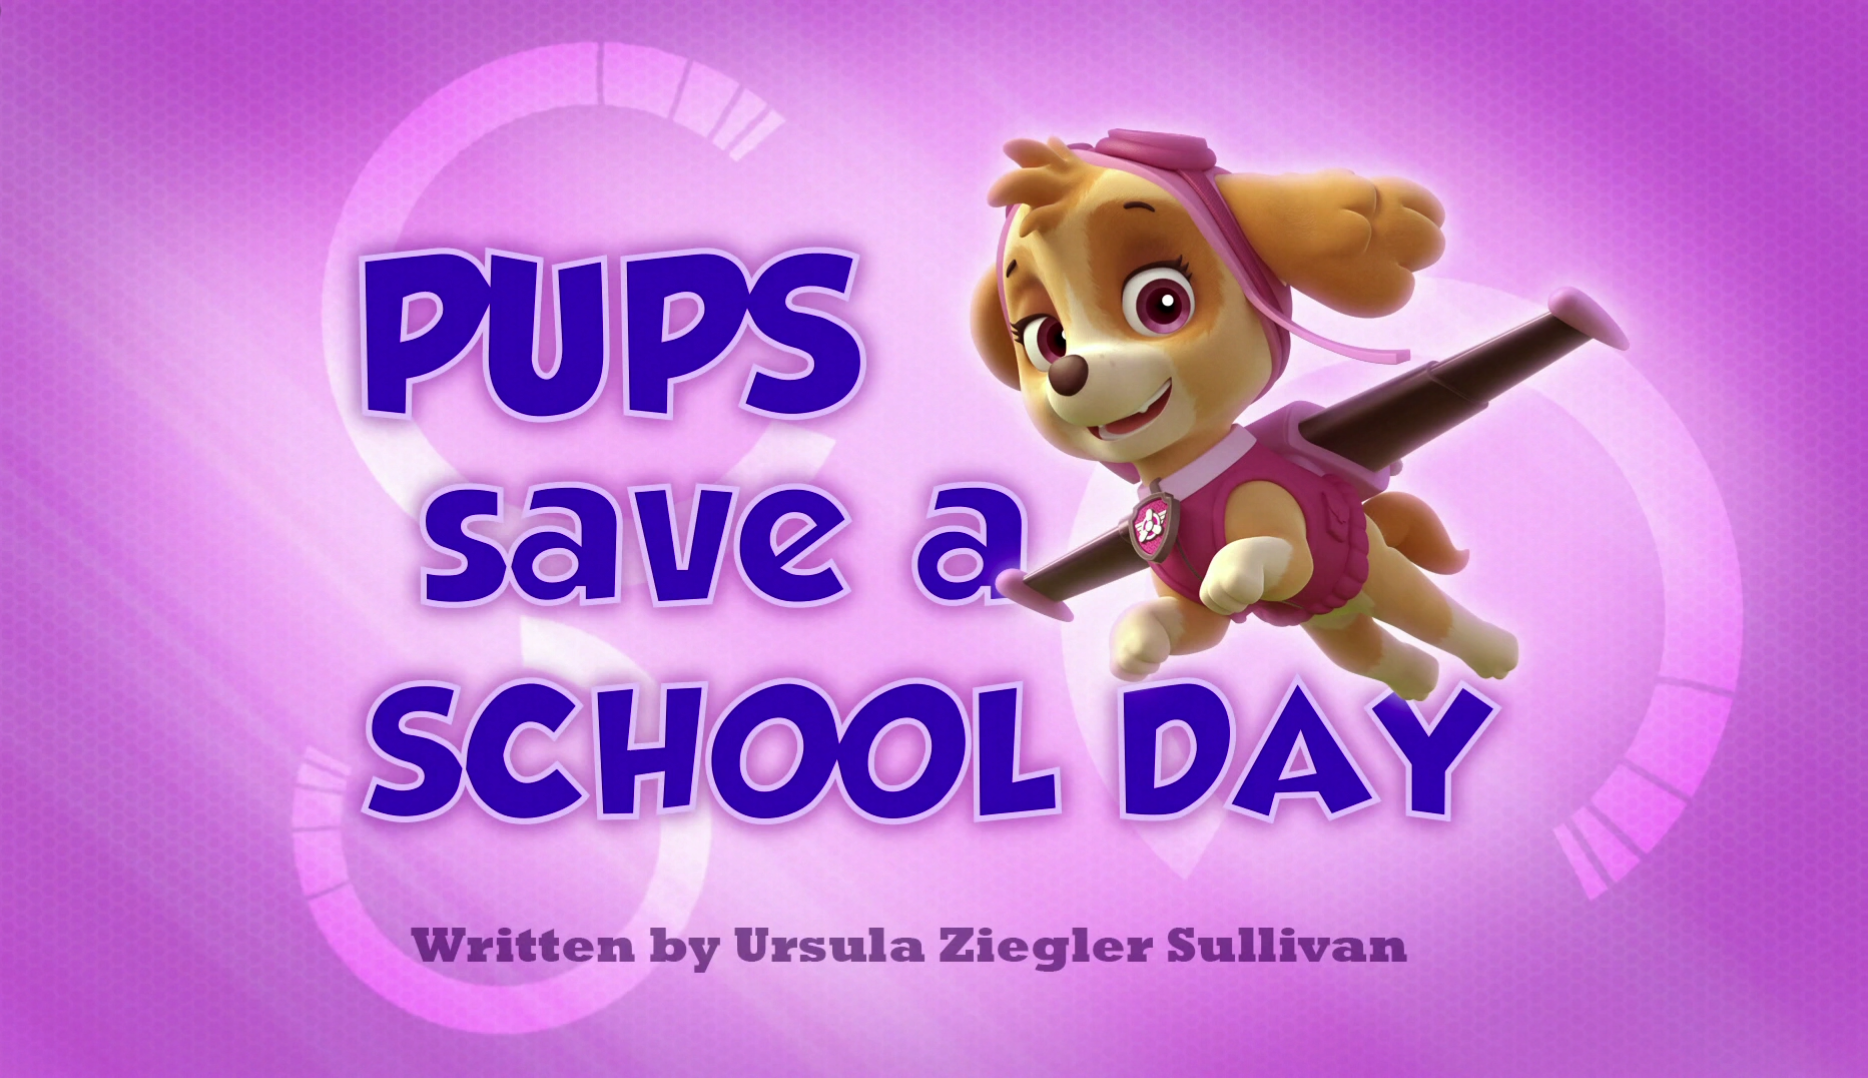 https://static.wikia.nocookie.net/paw-patrol/images/9/97/Pups_Save_a_School_Day.png/revision/latest?cb=20131115190104